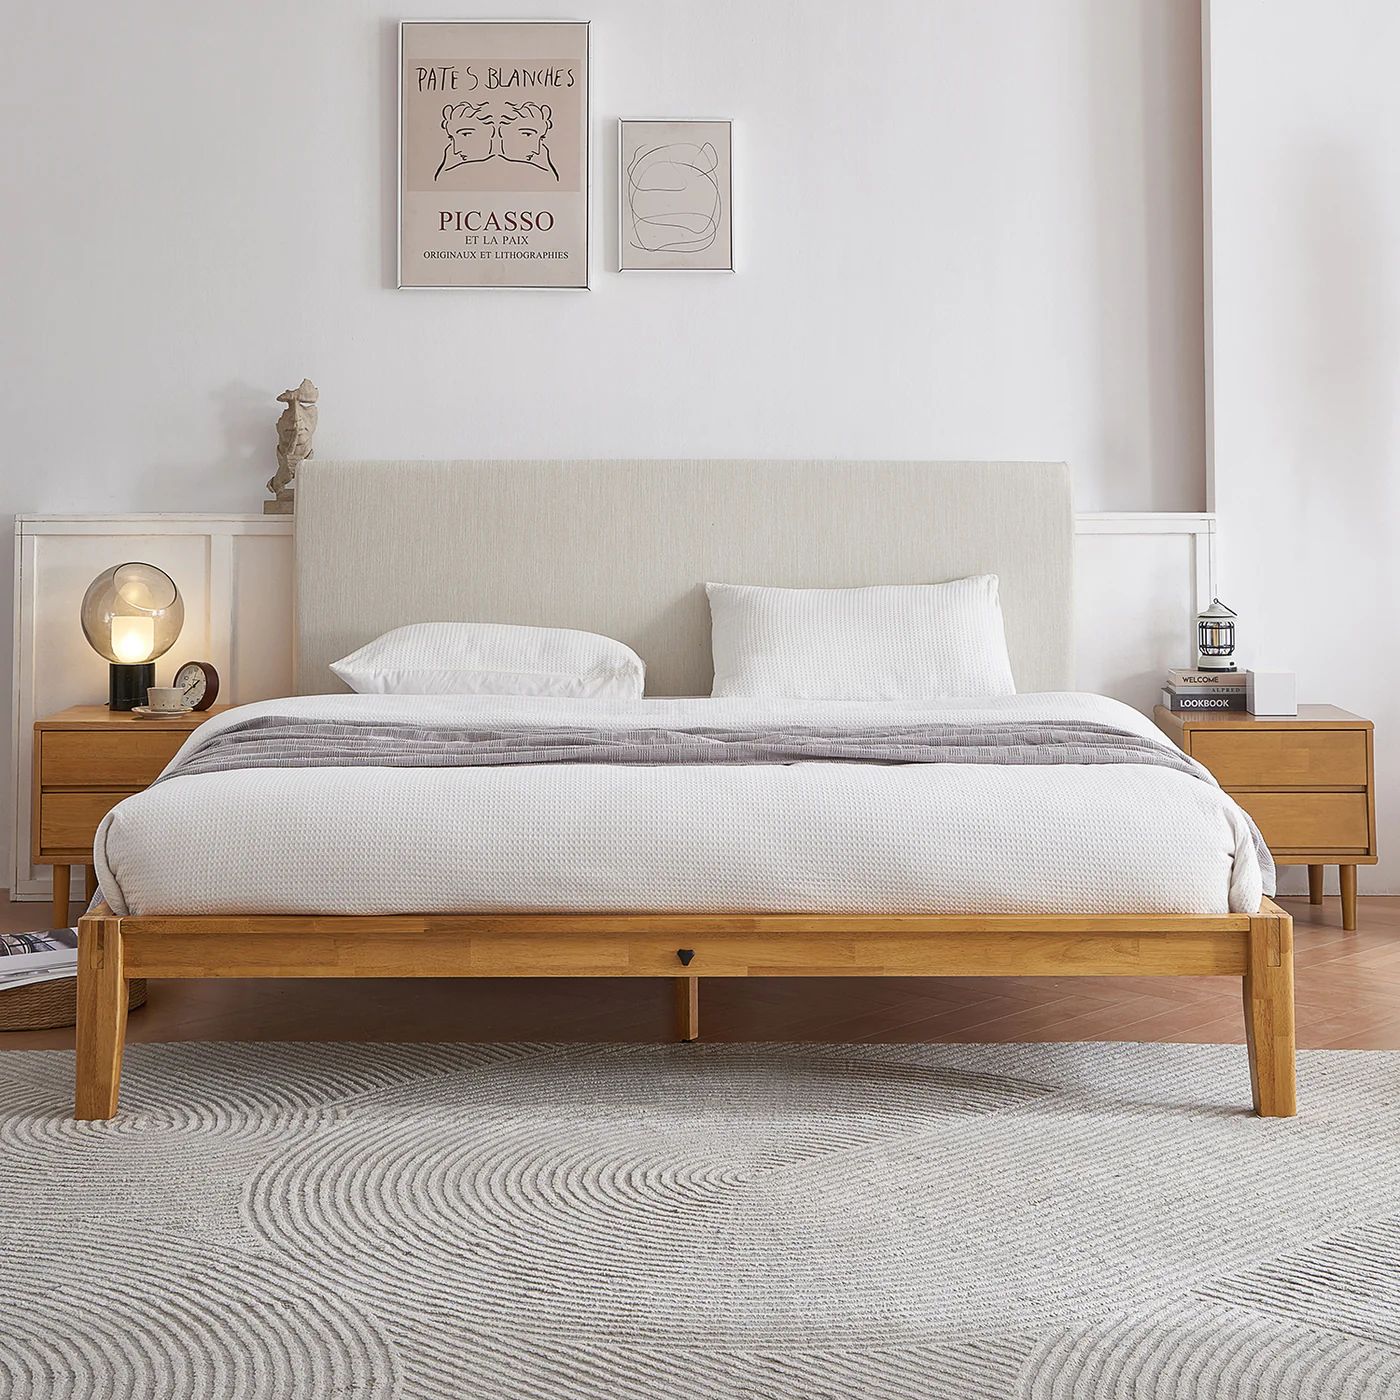 The Charm 2.0 Bed | Valyou Furniture